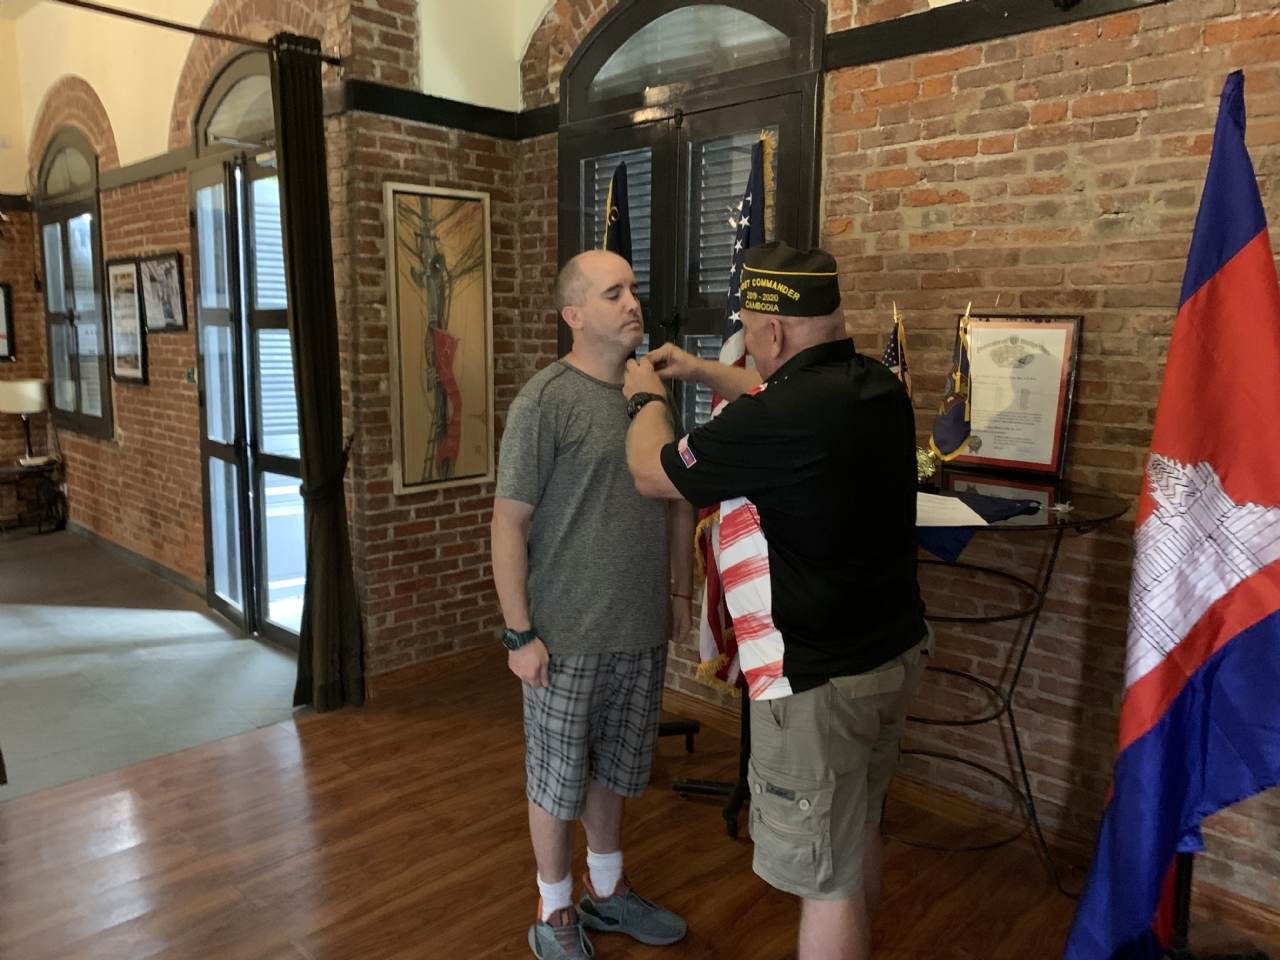 Welcome to VFW Post 11575, Comrade Cox!